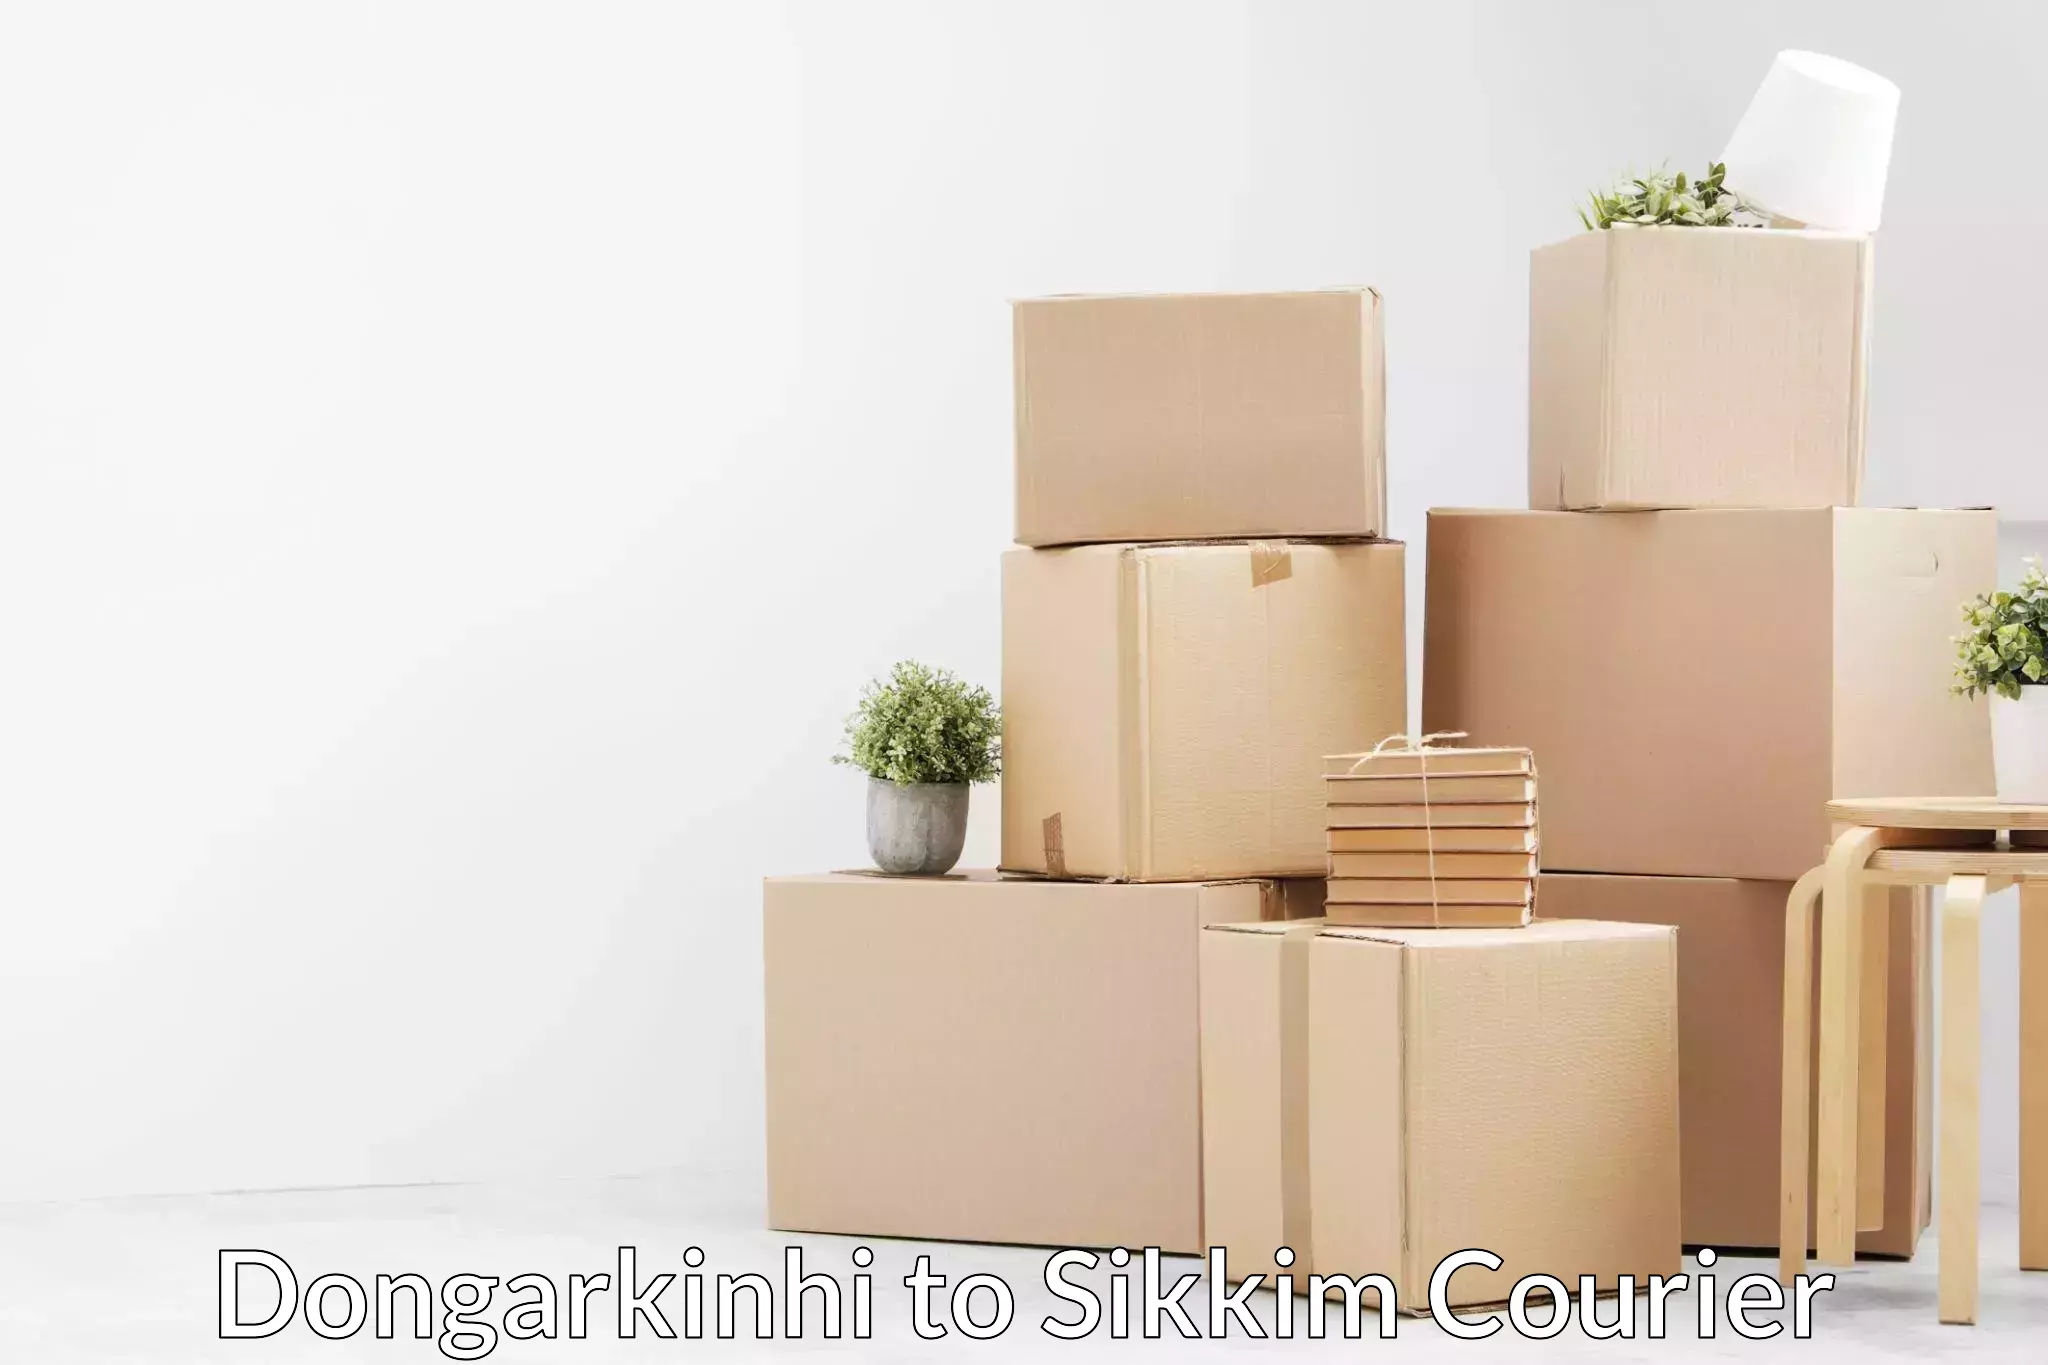 Trusted home movers Dongarkinhi to Sikkim